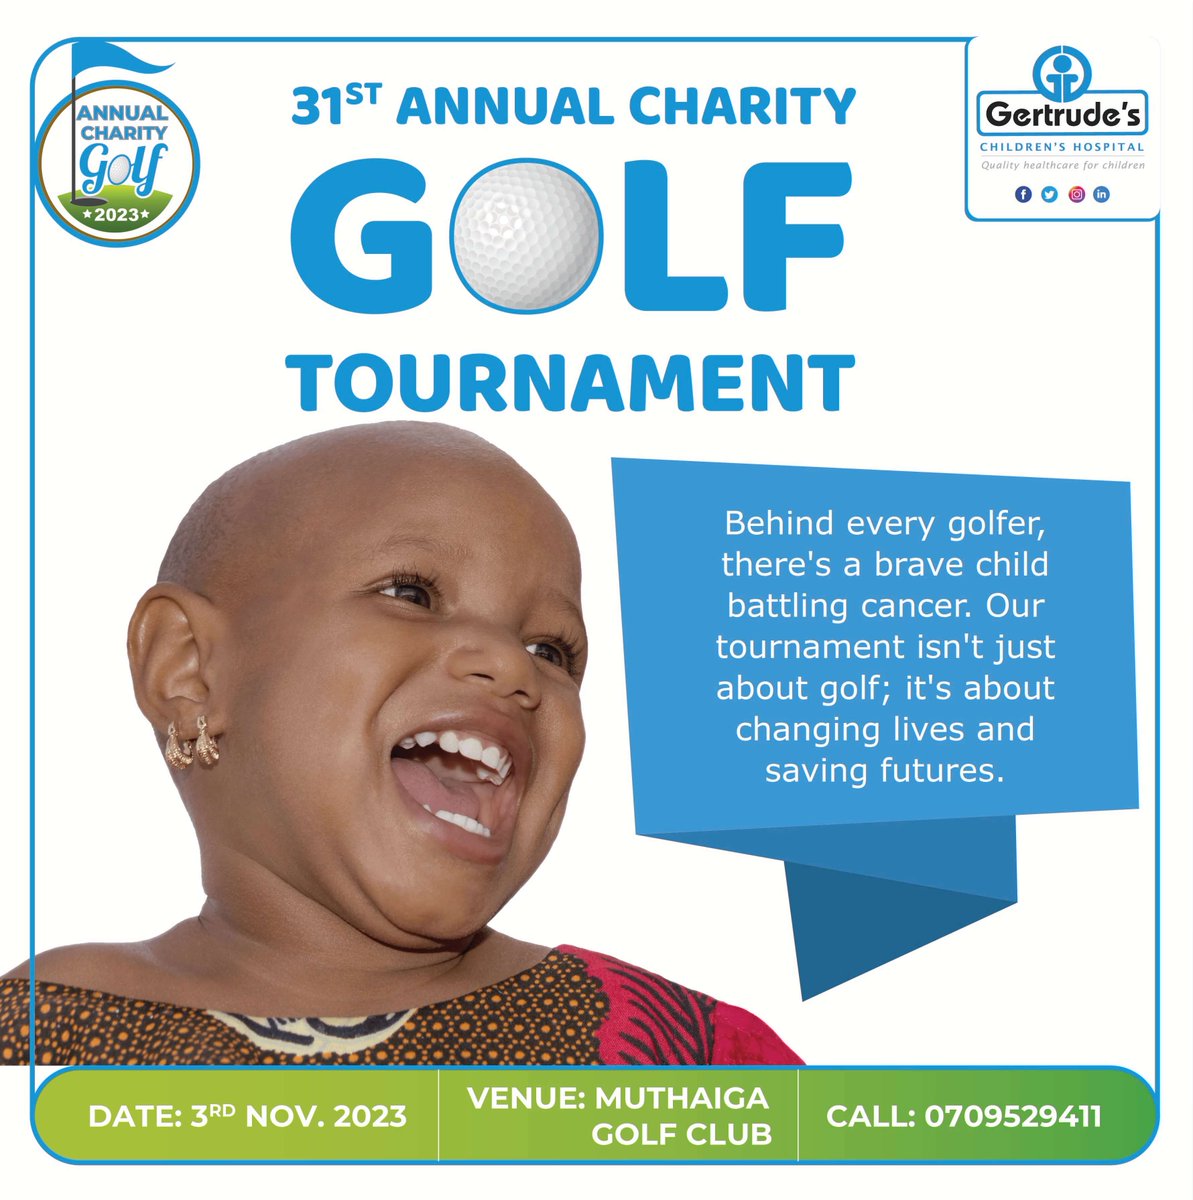 Our Golf Event is not just about greens and fairways; it's about giving children with cancer a chance to experience the joy of life. 🌟 Join us in this heartfelt mission. 💛 #GertrudesGolfTournament2023 #GertrudesKe #UlizaDaktari